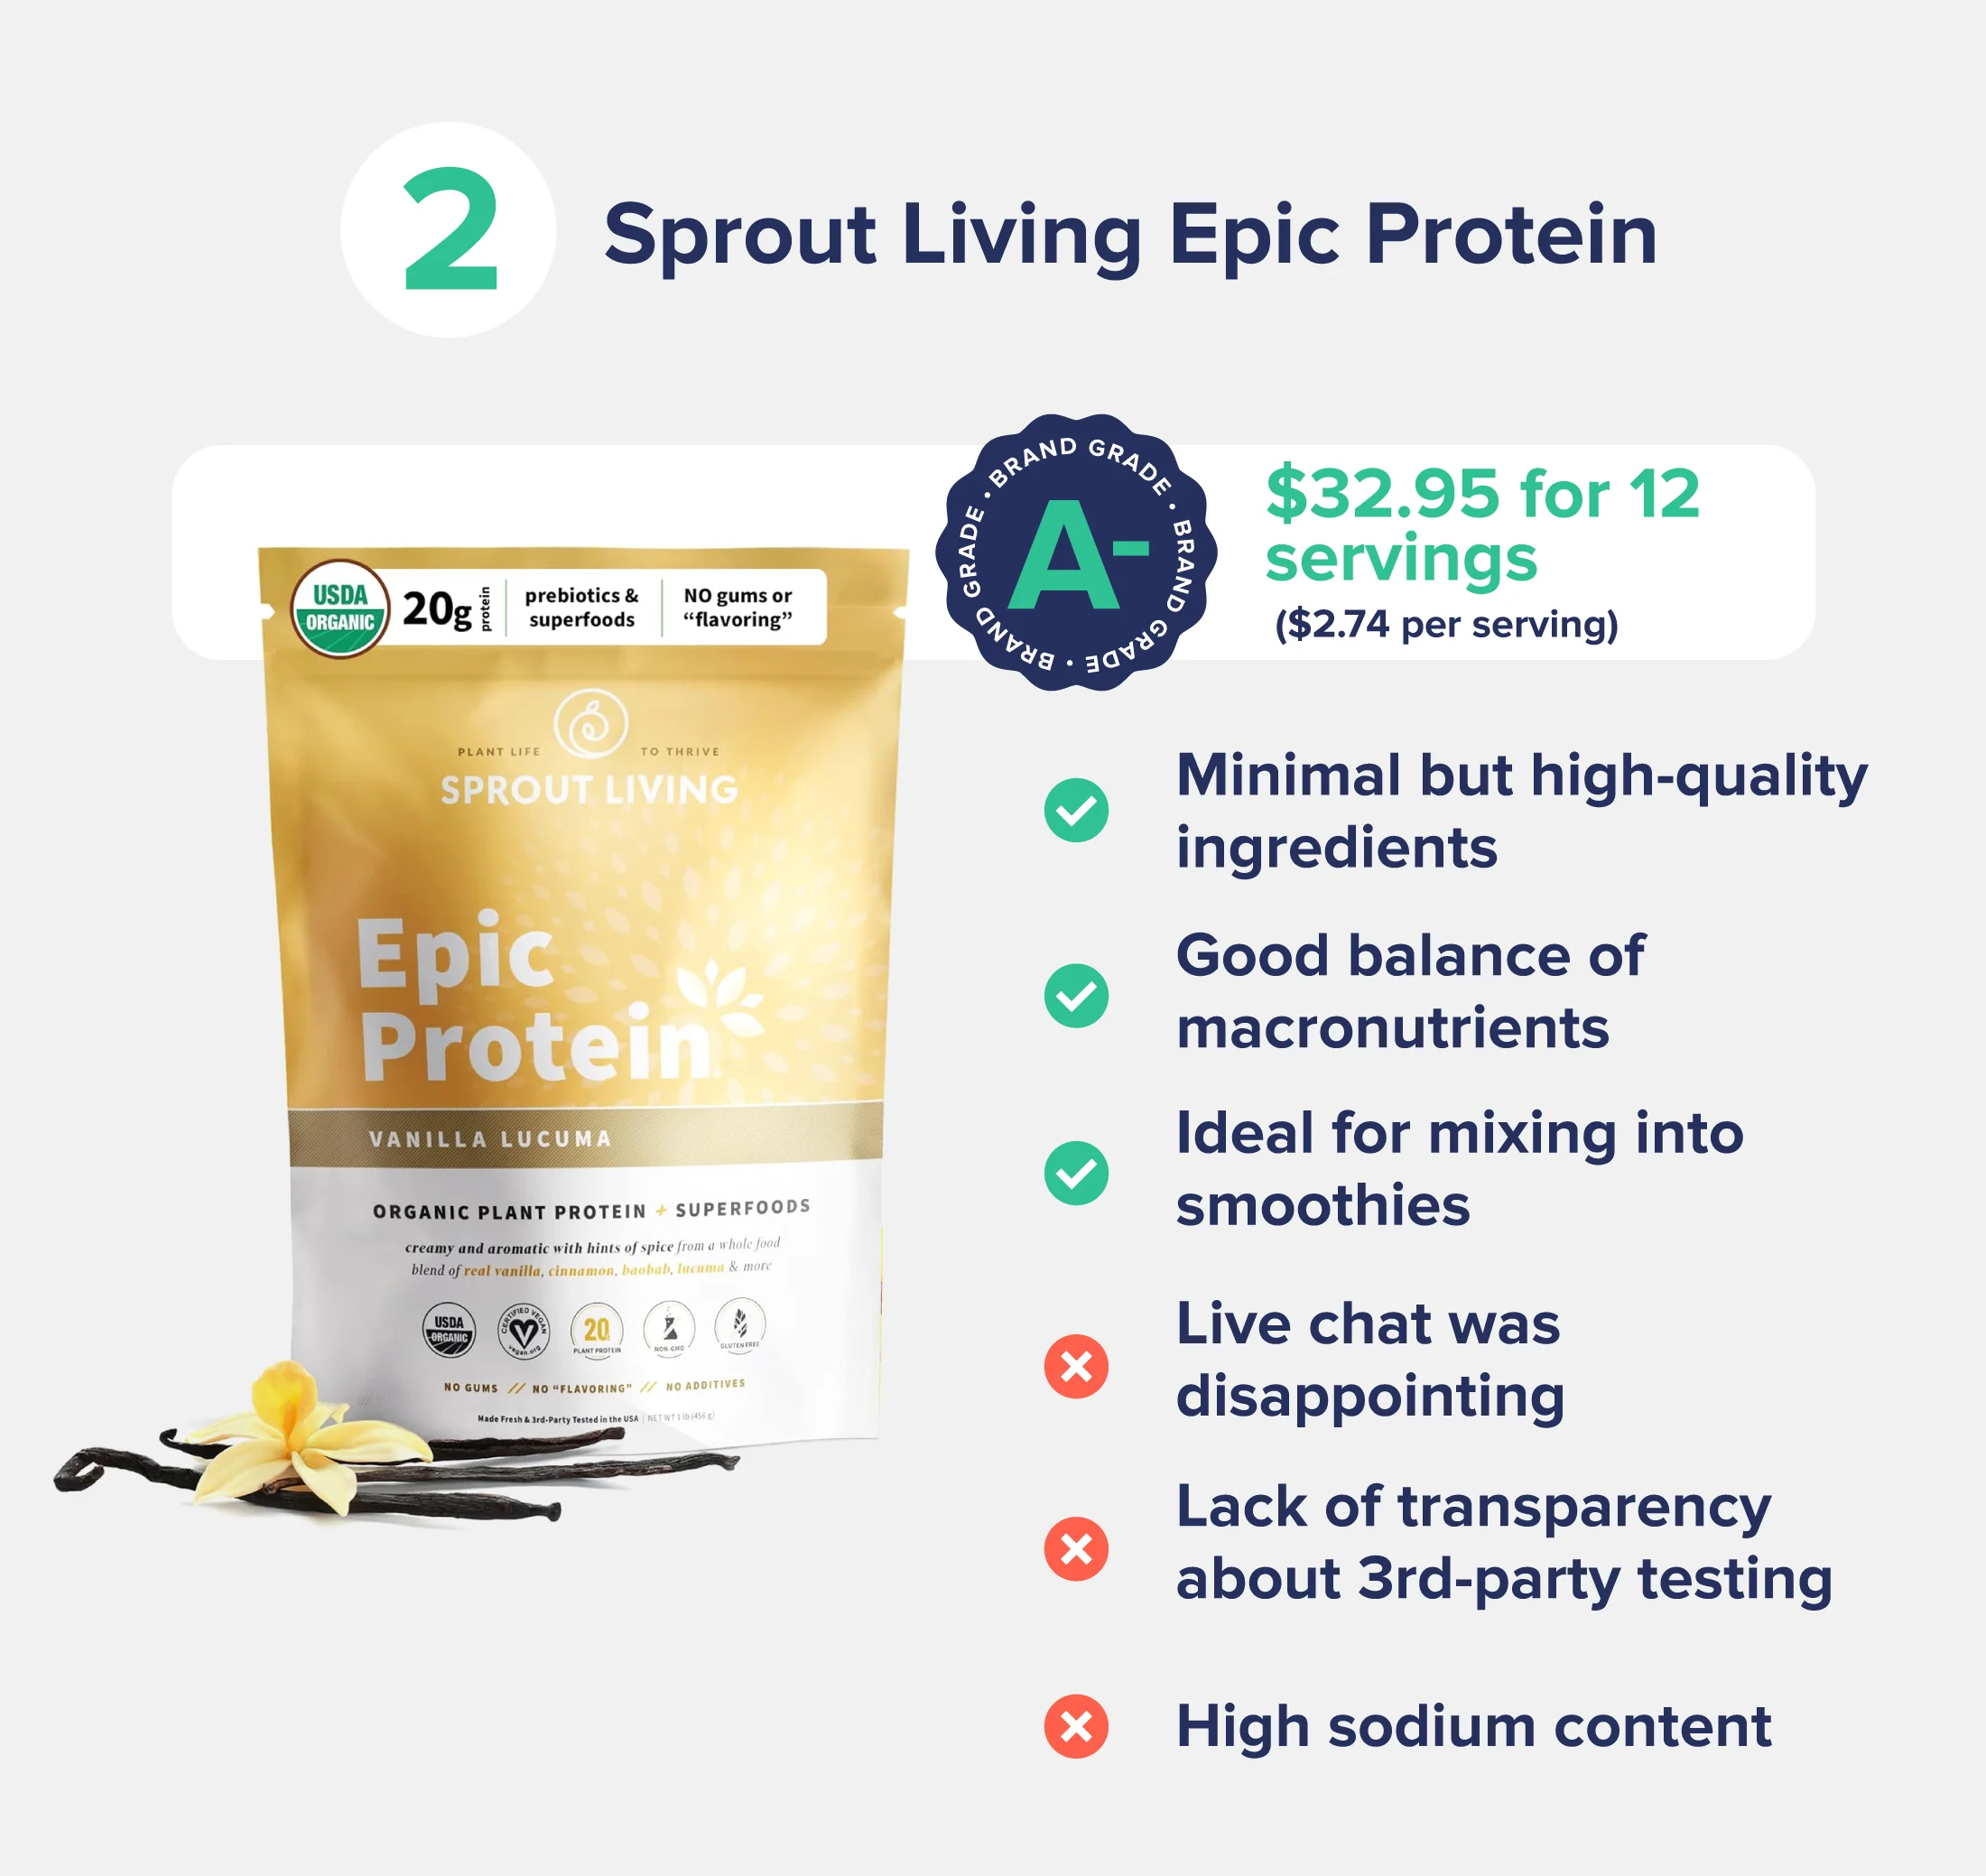 Sprout Living Epic Protein with list of pros and cons